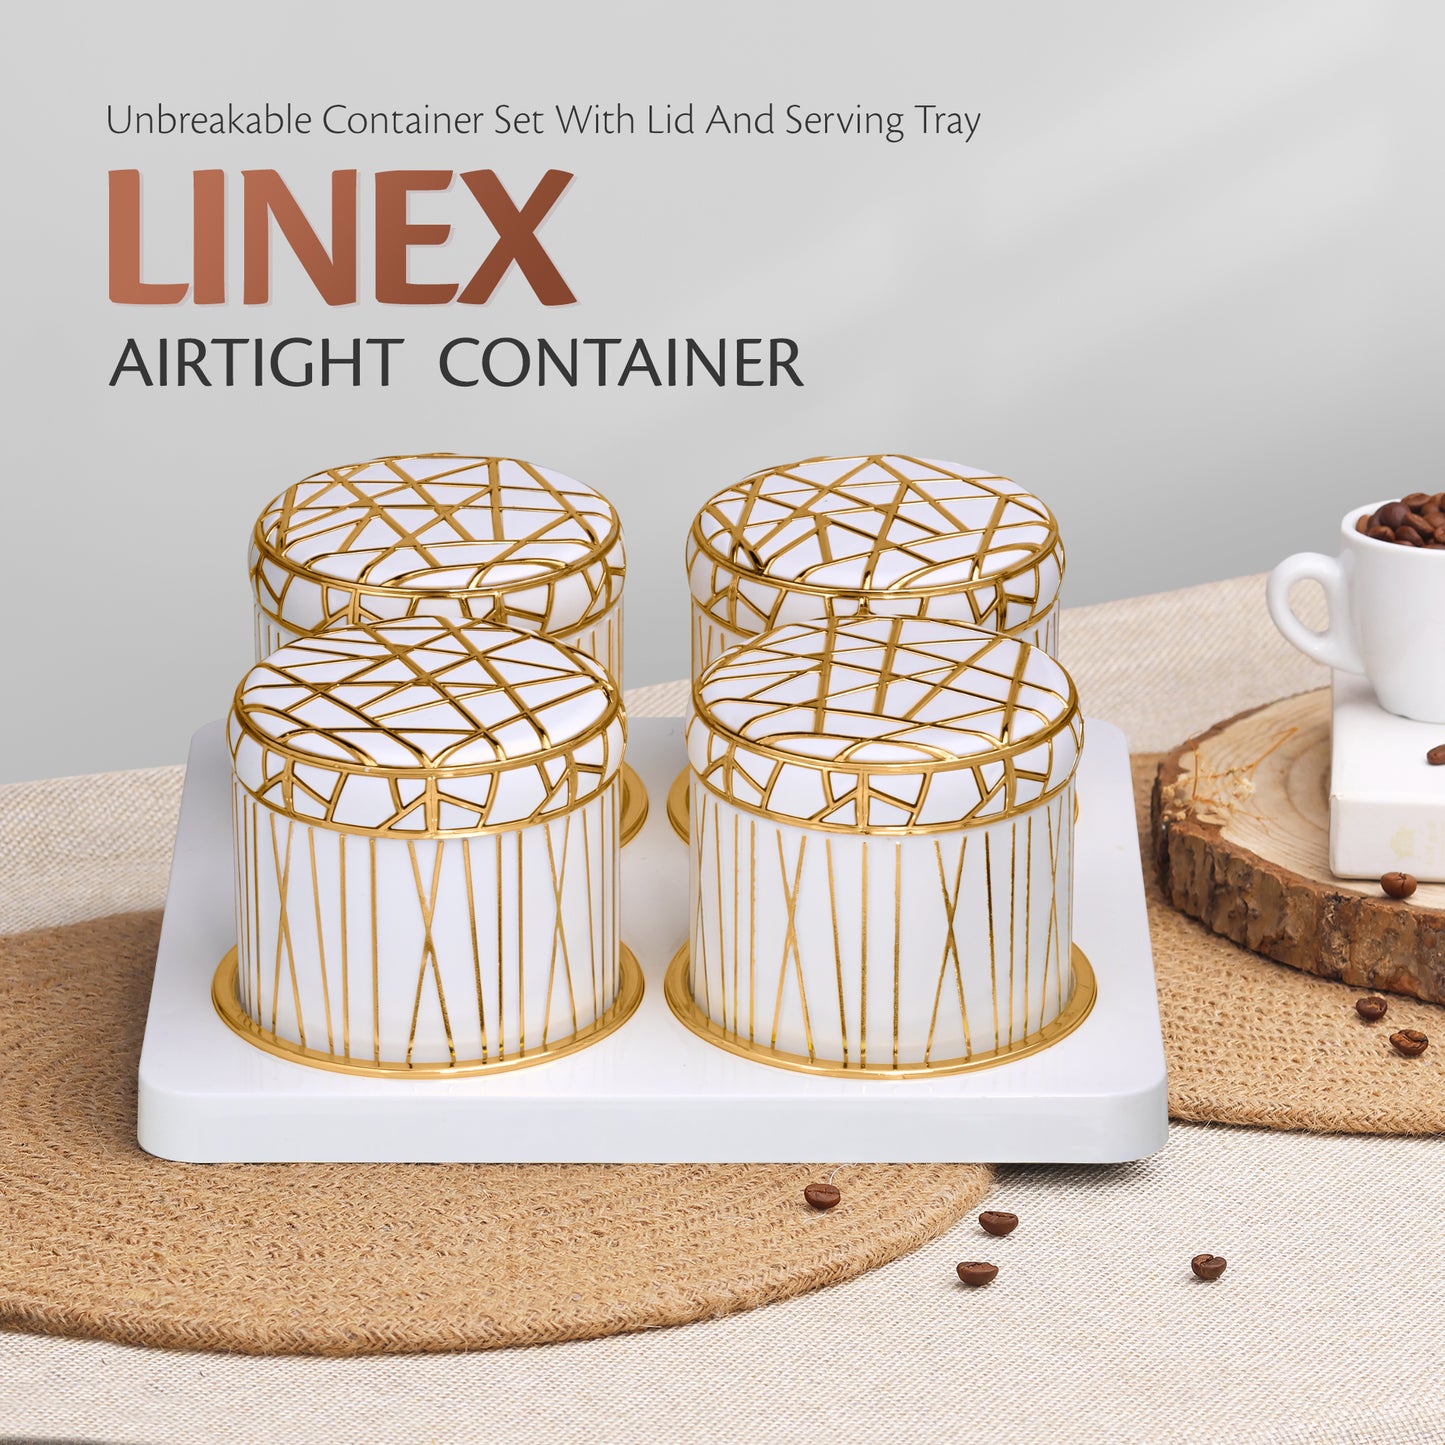 SELVEL Royal Linex Airtight Dry Fruit Container Tray Set - 4 Pieces (450ml), White Polypropylene with Luxurious Gold Foil Embellishments